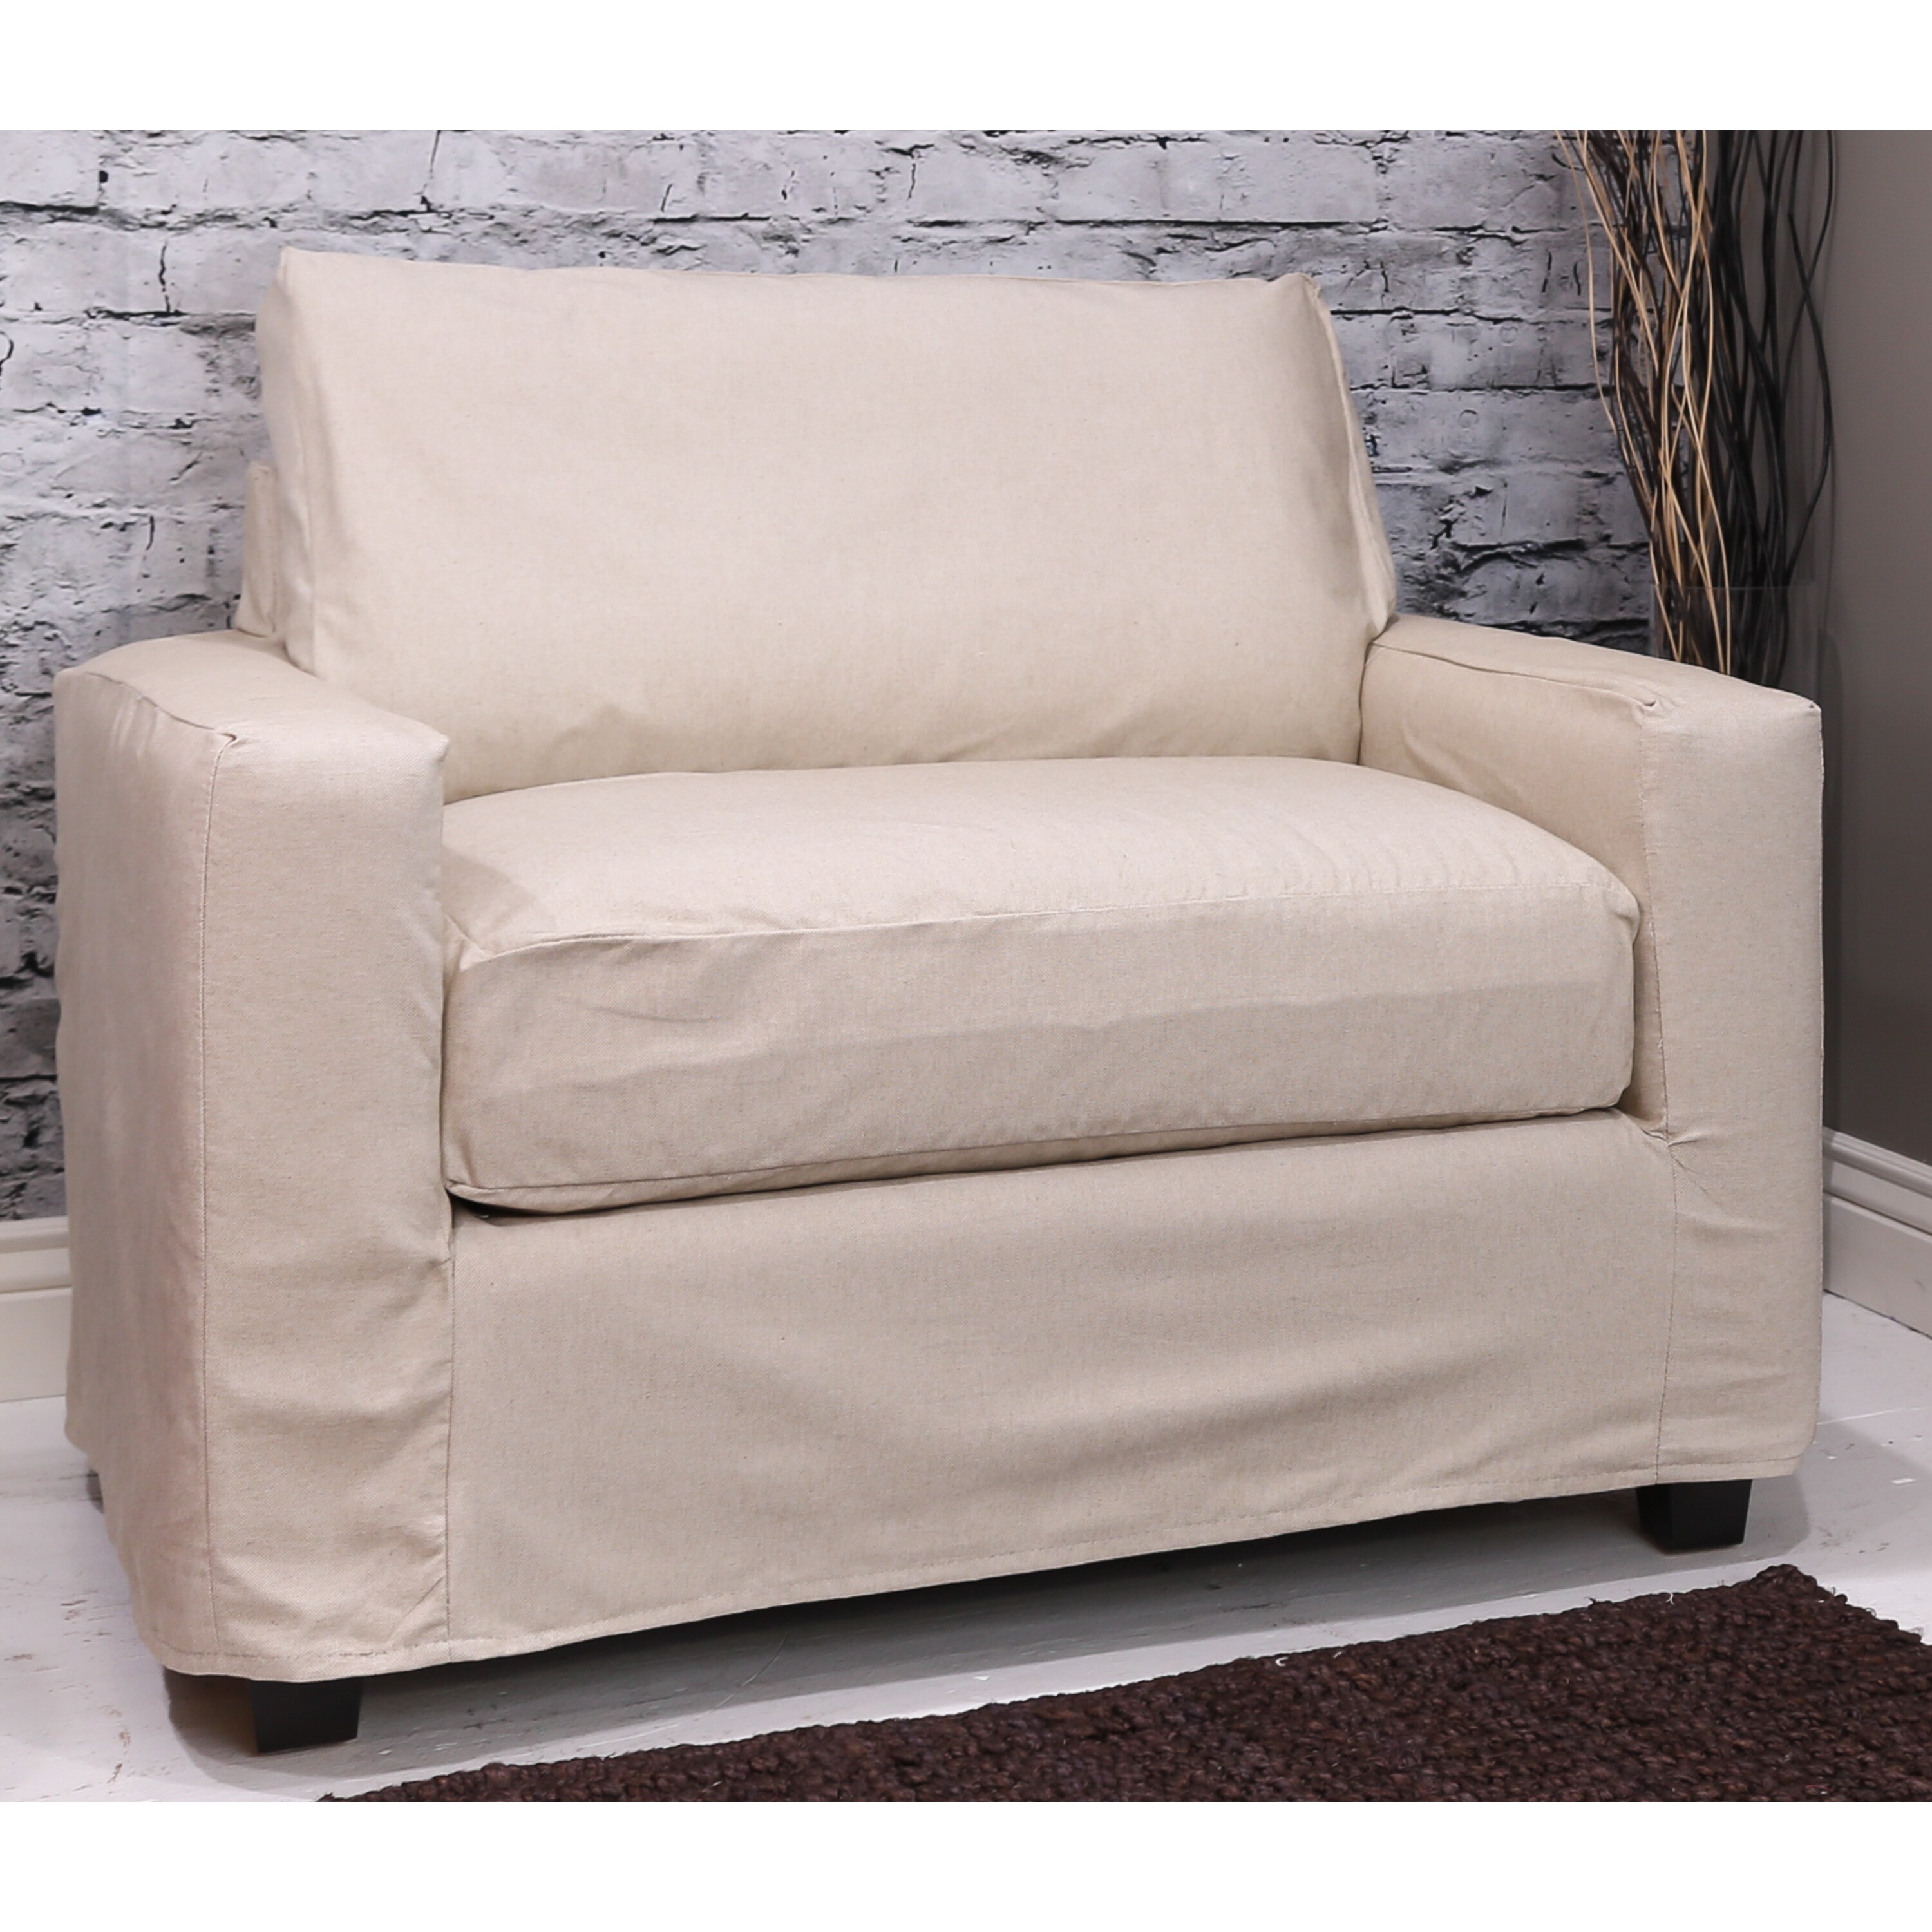 Shop Bombay Hornell Knockdown Chair And A Half With Natural Slipcover Overstock 11047420